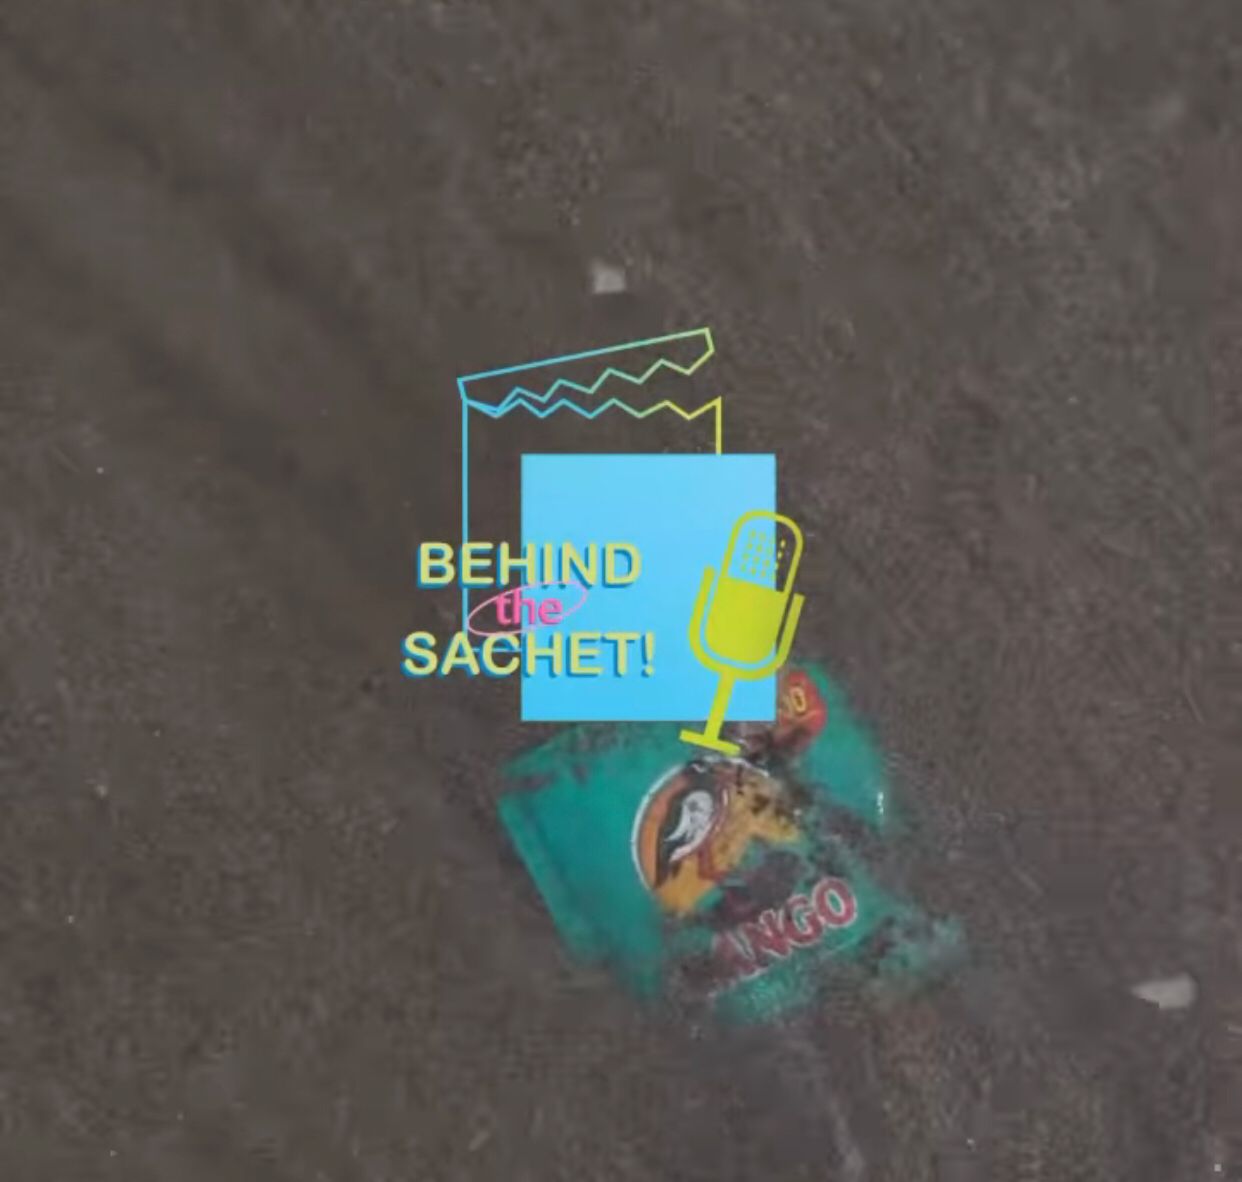 An image of a sachet sitting in sand under shallow water. In the foreground is the “Behind the Sachet!“ logo with a blue video icon and yellow microphone icon.